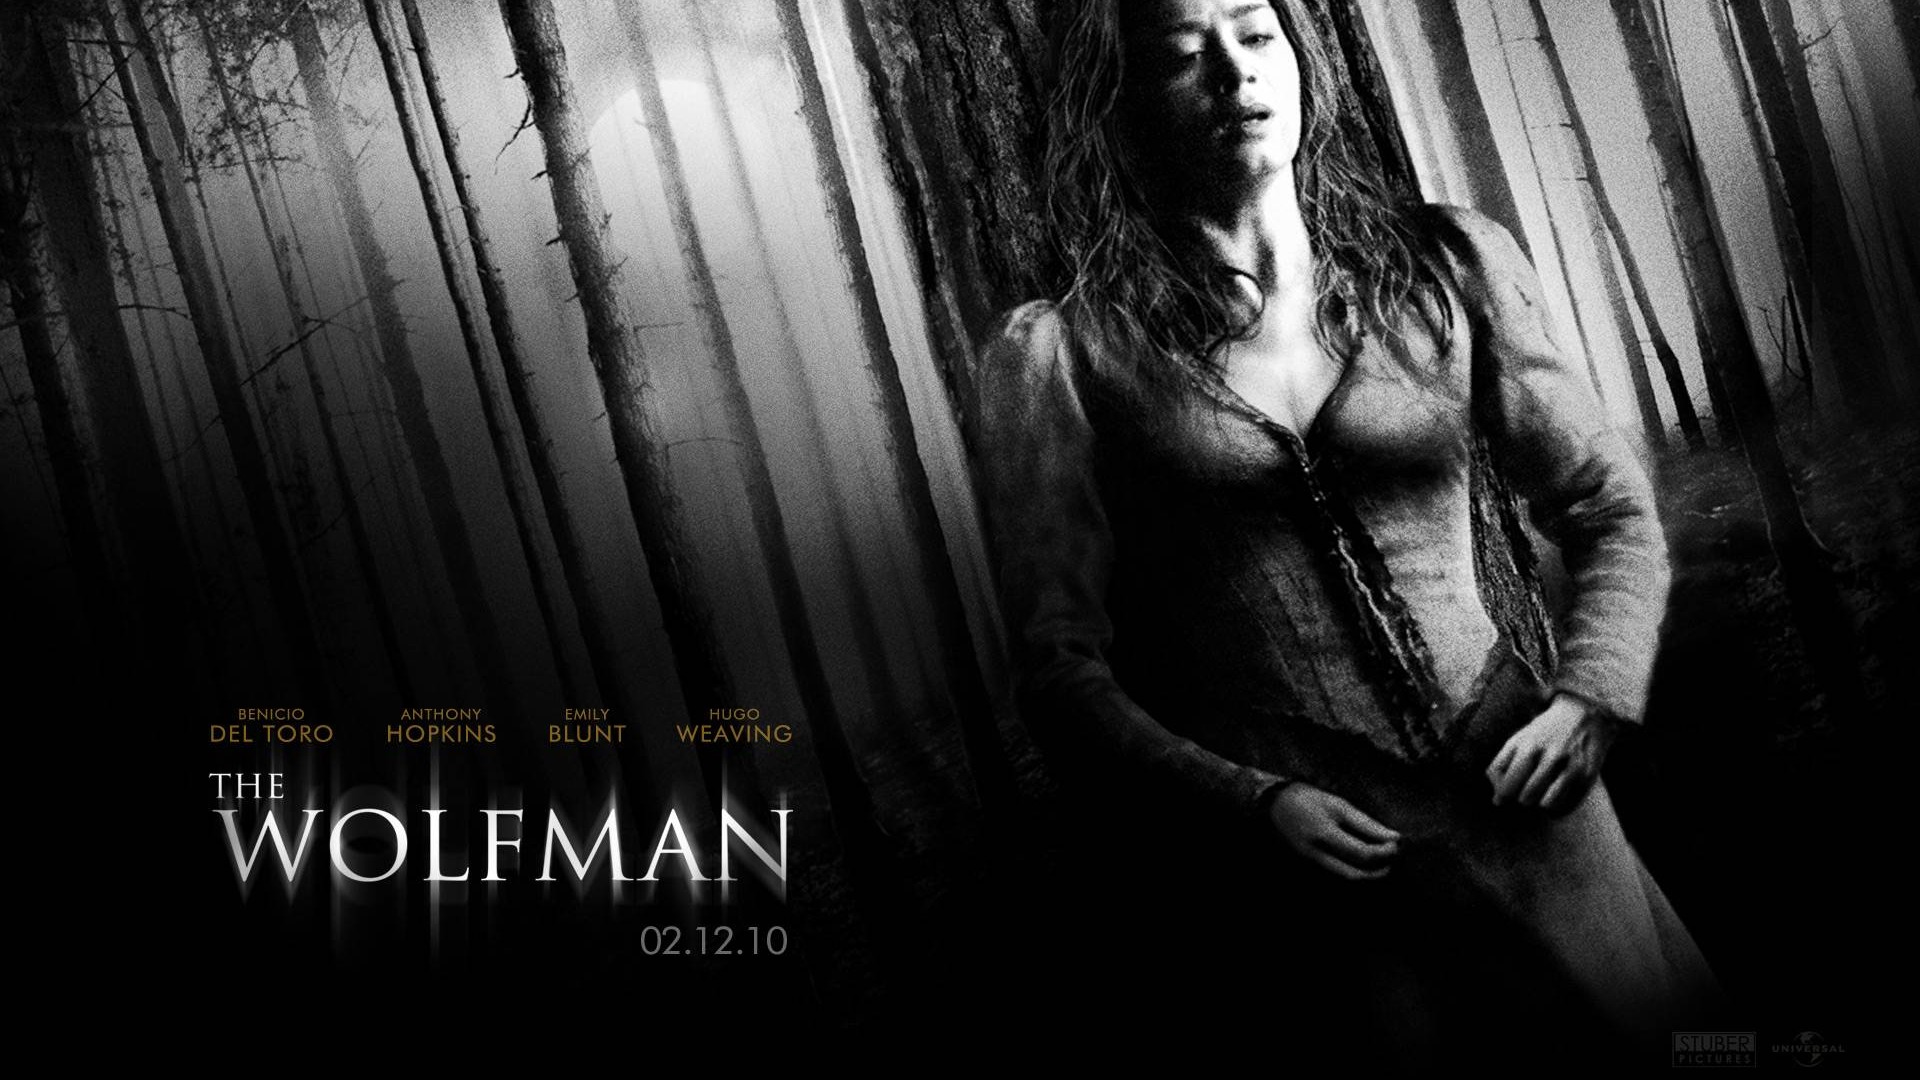 The Wolfman Movie Wallpapers #10 - 1920x1080